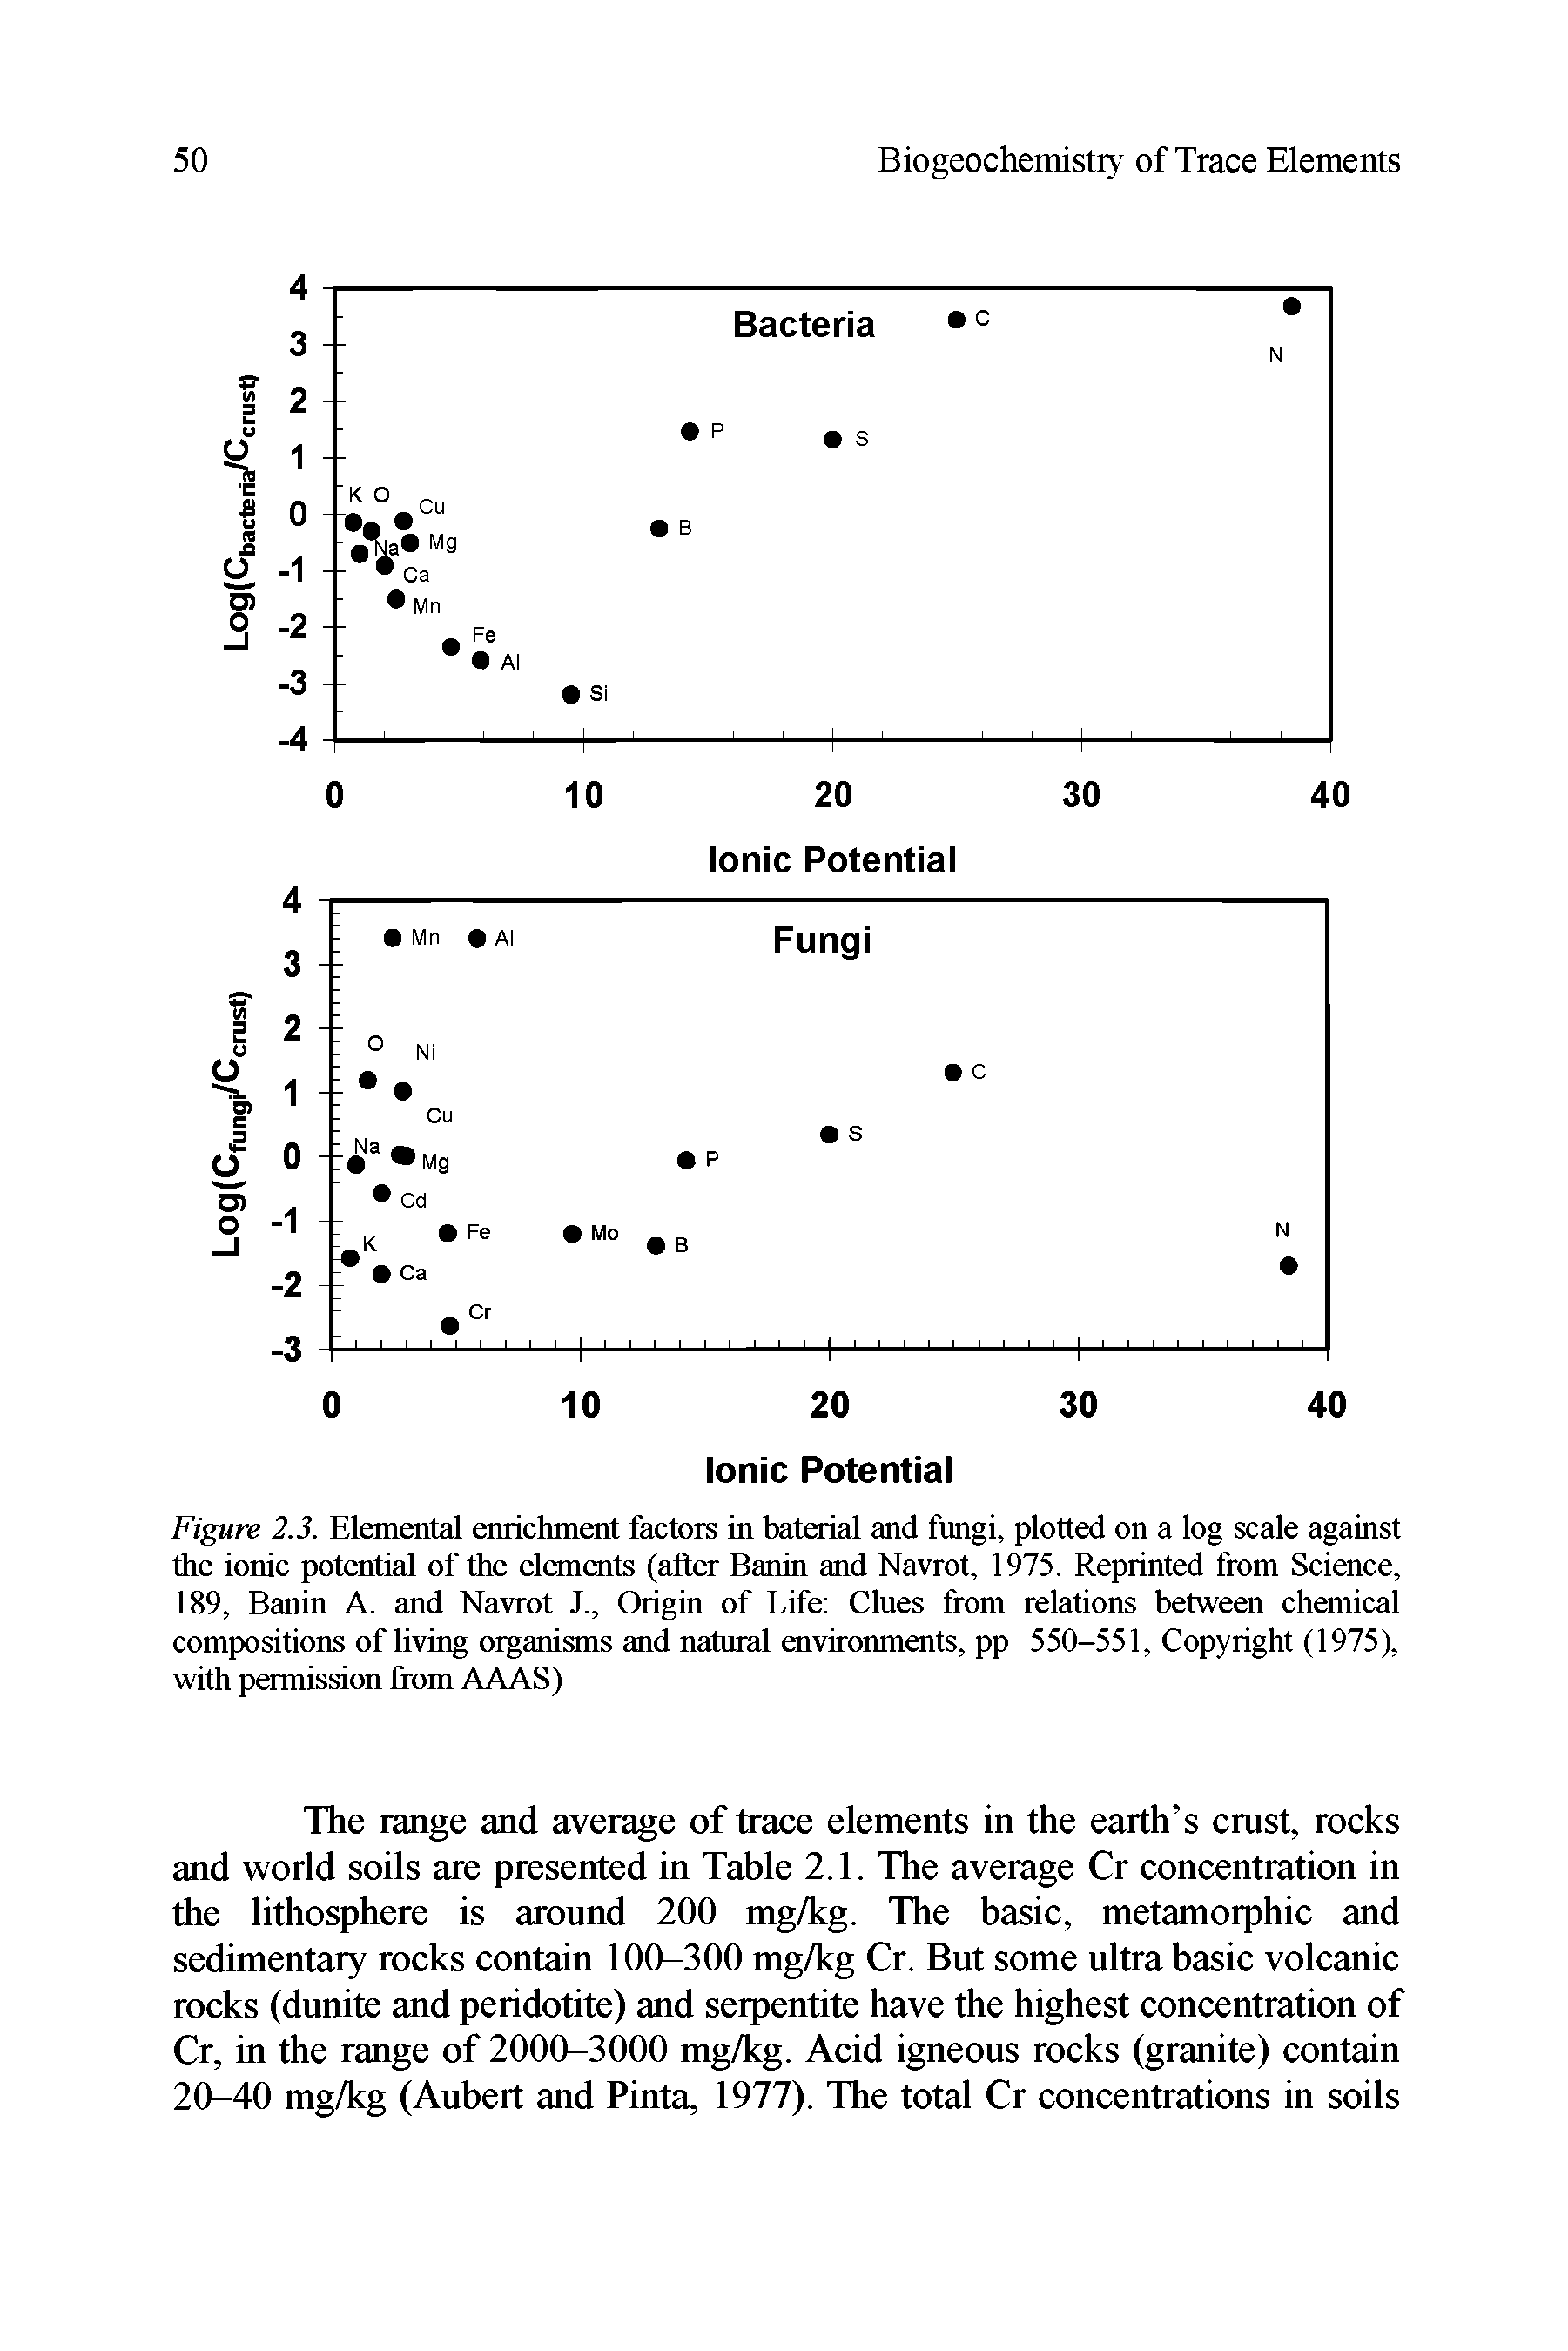 Figure 2.3. Elemental enrichment factors in baterial and fungi, plotted on a log scale against the ionic potential of the elements (after Banin and Navrot, 1975. Reprinted from Science, 189, Banin A. and Navrot J., Origin of Life Clues from relations between chemical compositions of living organisms and natural environments, pp 550-551, Copyright (1975), with permission from AAAS)...